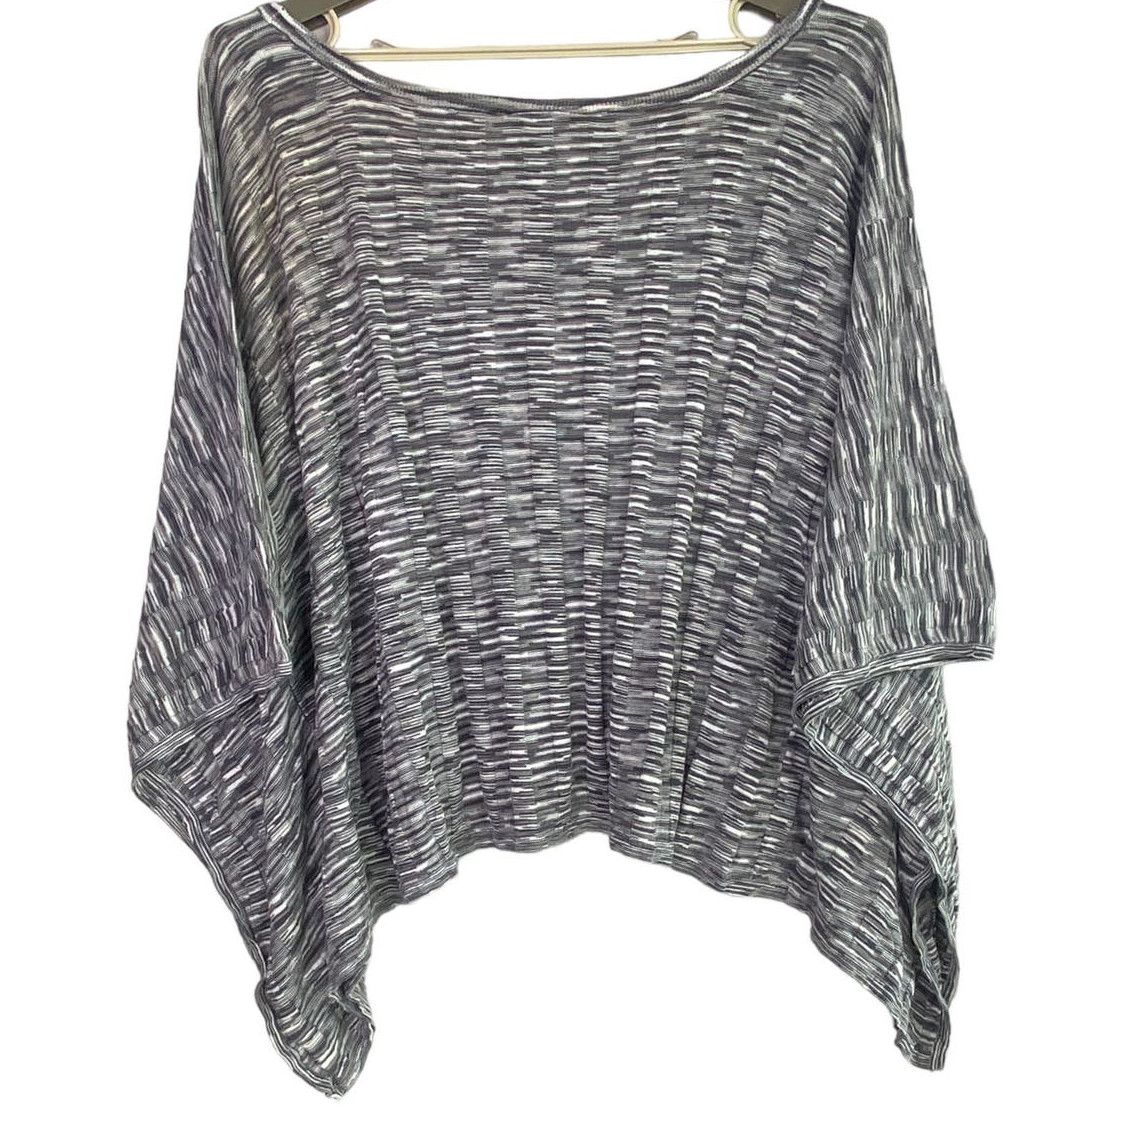 Other Lane Bryant Oversized Blouse Lightweight 26 28 Grey Black Size 4XL / US 24-26 - 12 Preview